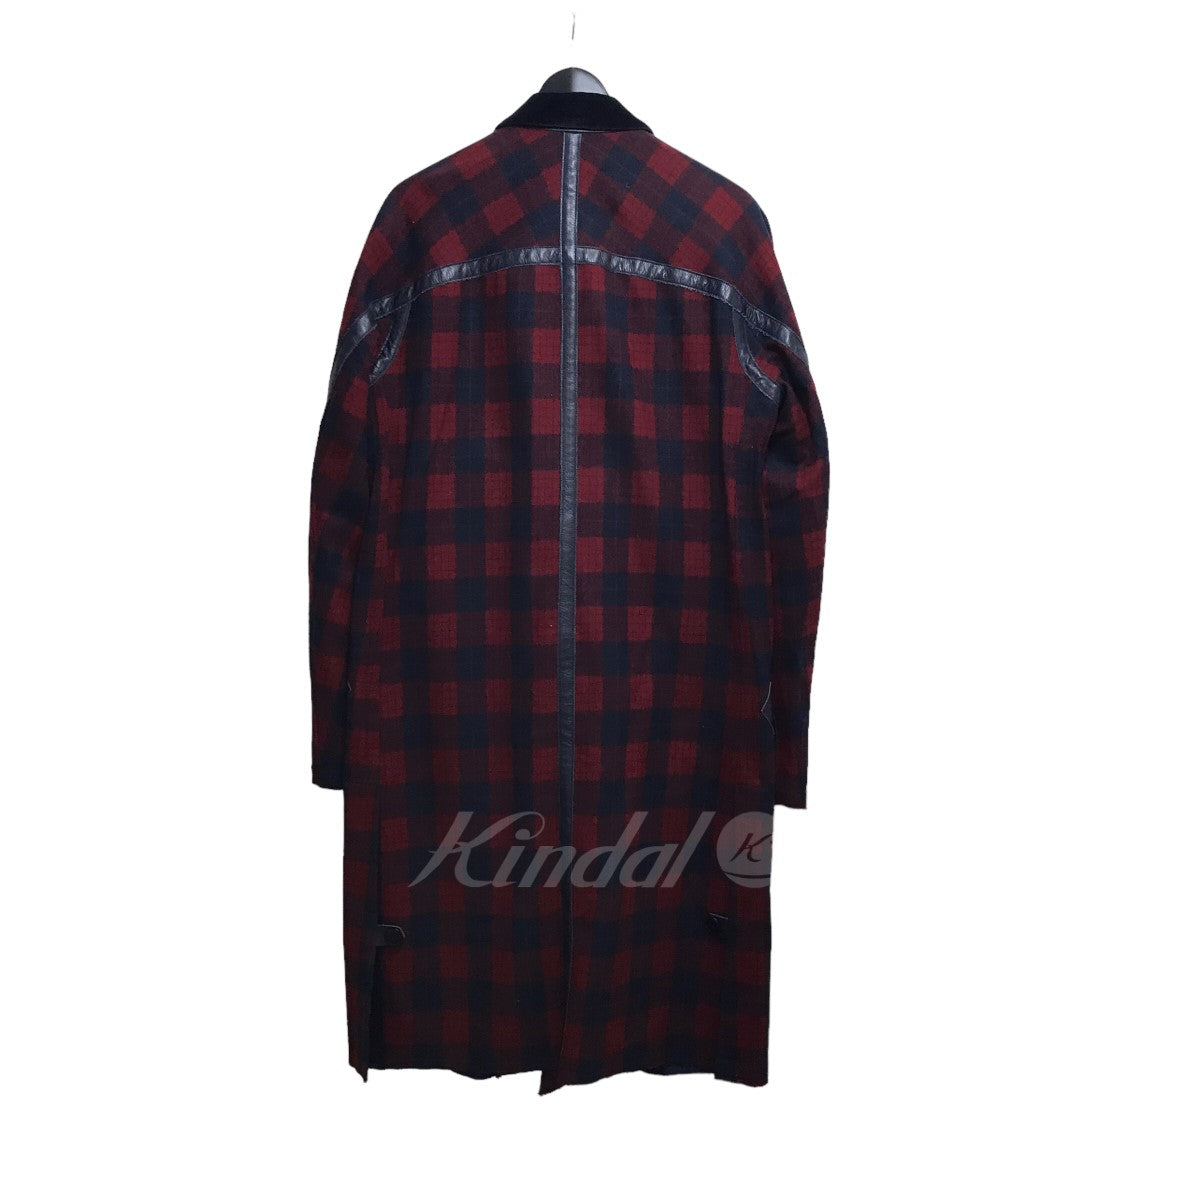 JohnUNDERCOVER×PENDLETON 16AW チェスターコート JUP9302-1 JUP9302-1 ...